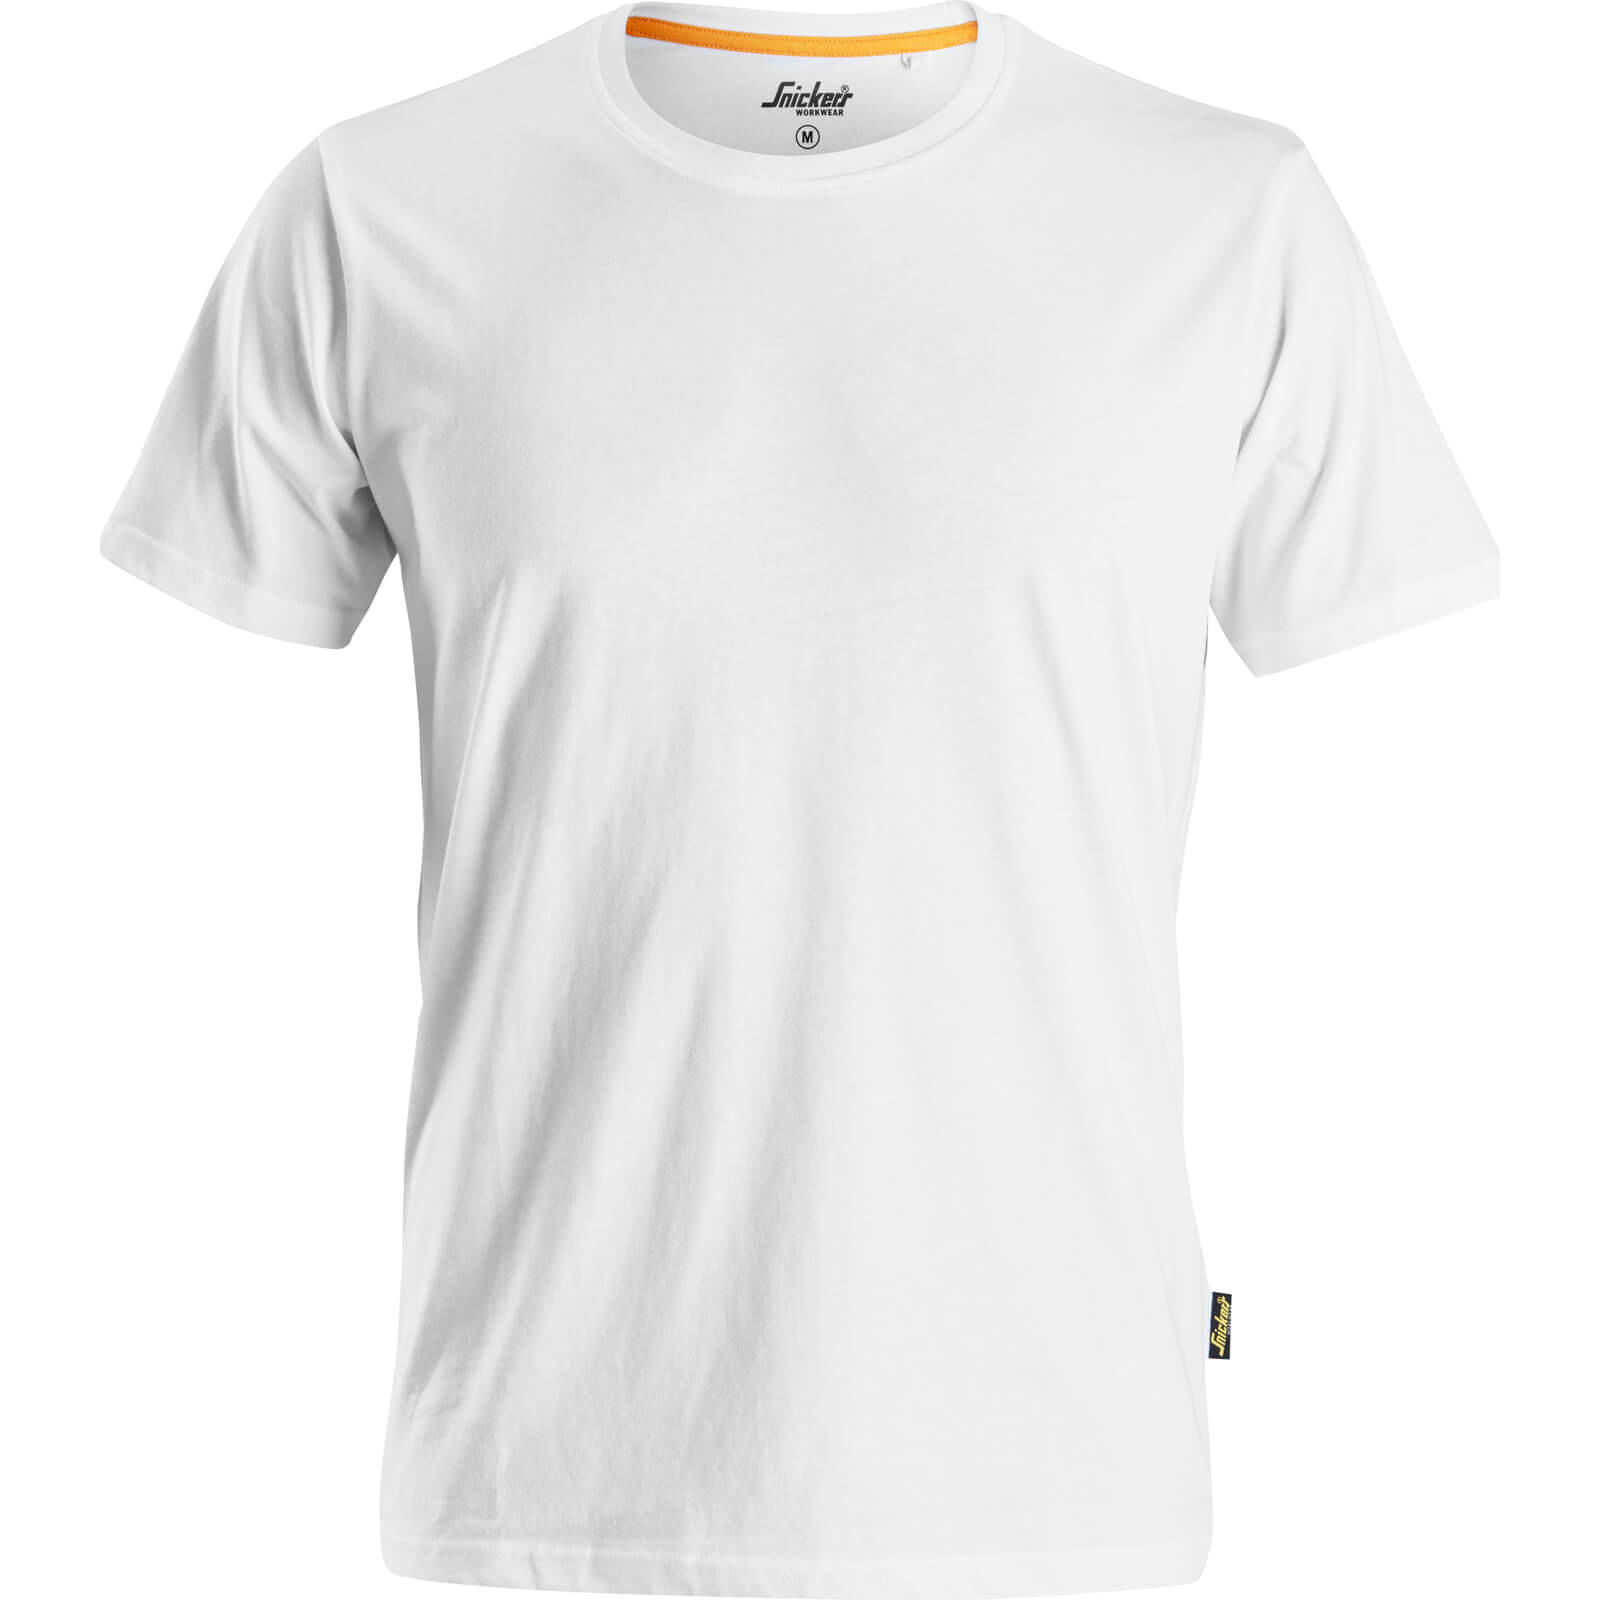 Image of Snickers Allround Work Organic Cotton T Shirt White 3XL